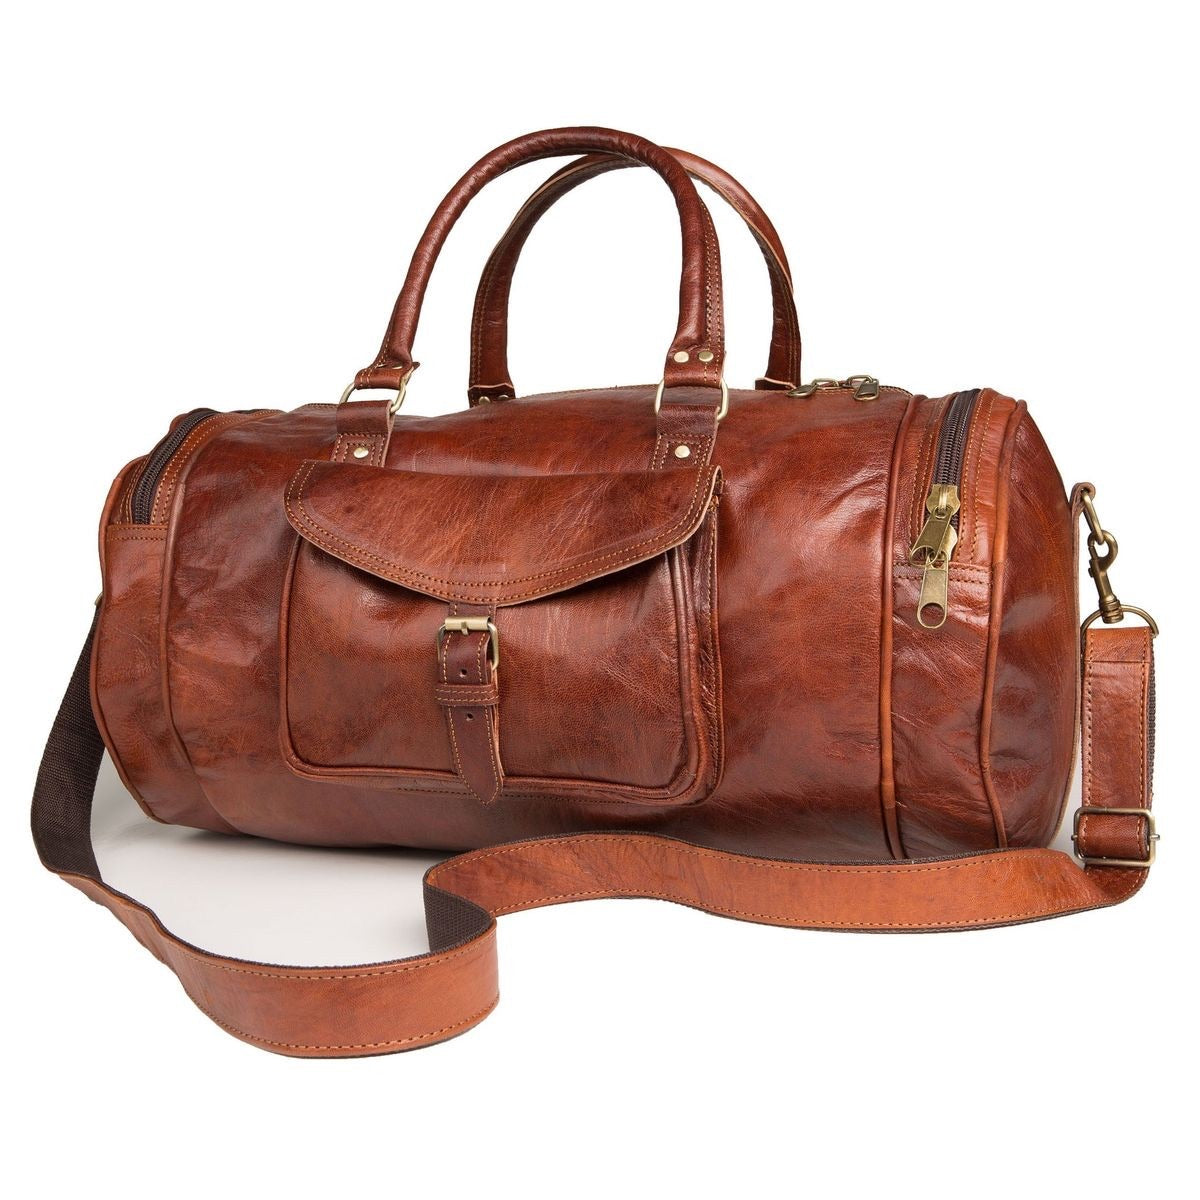 Round Leather Duffle Bag